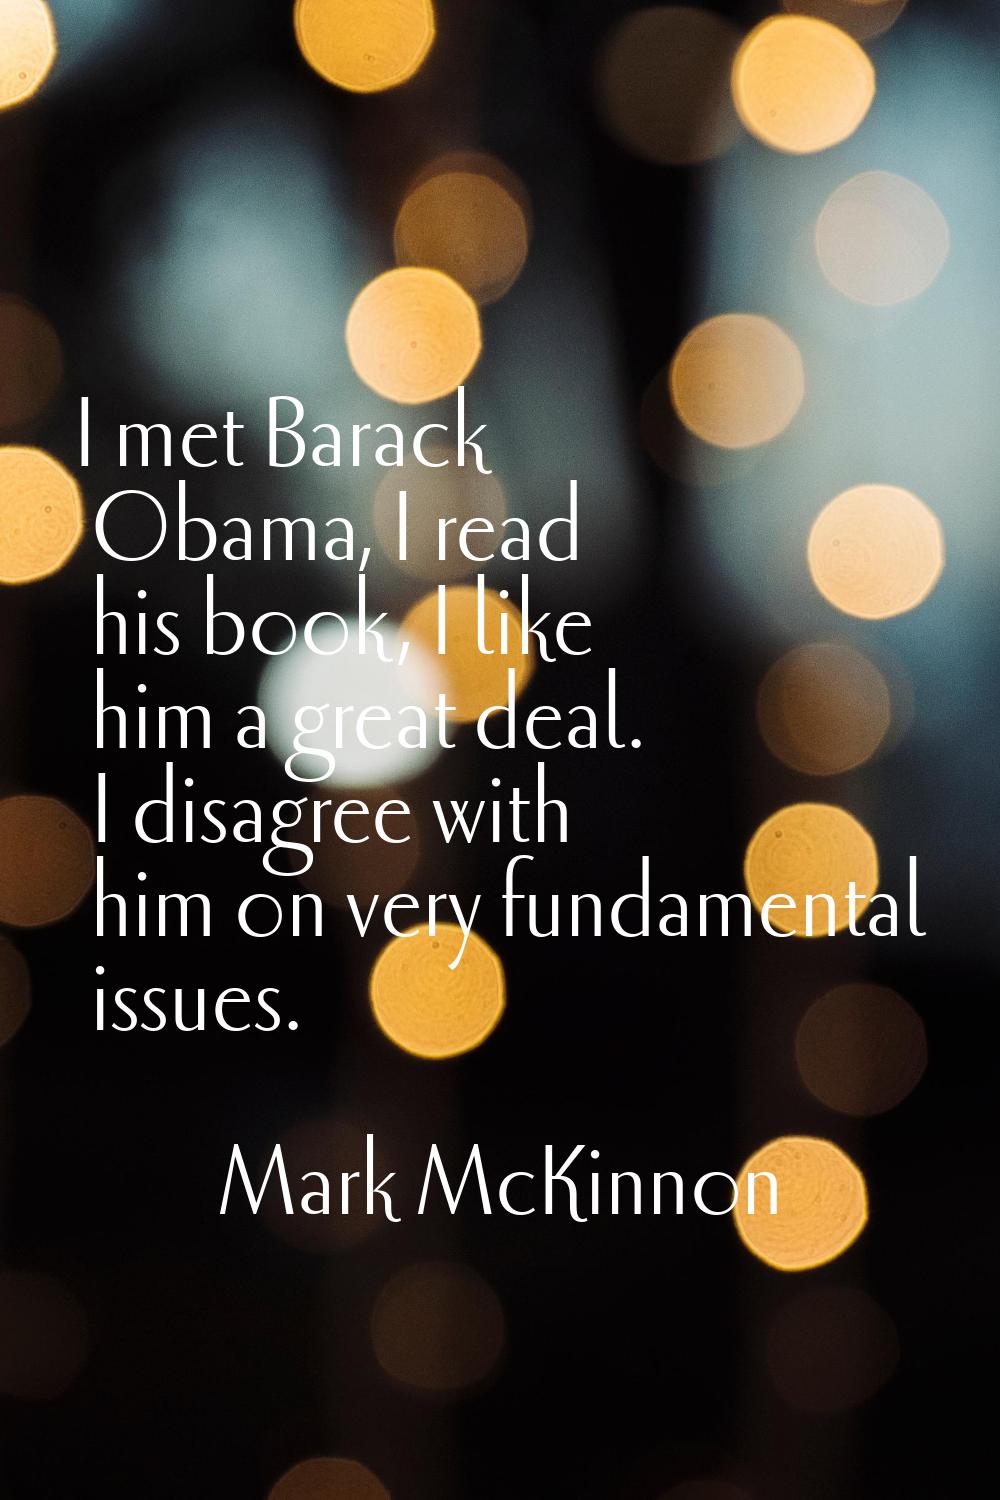 I met Barack Obama, I read his book, I like him a great deal. I disagree with him on very fundament